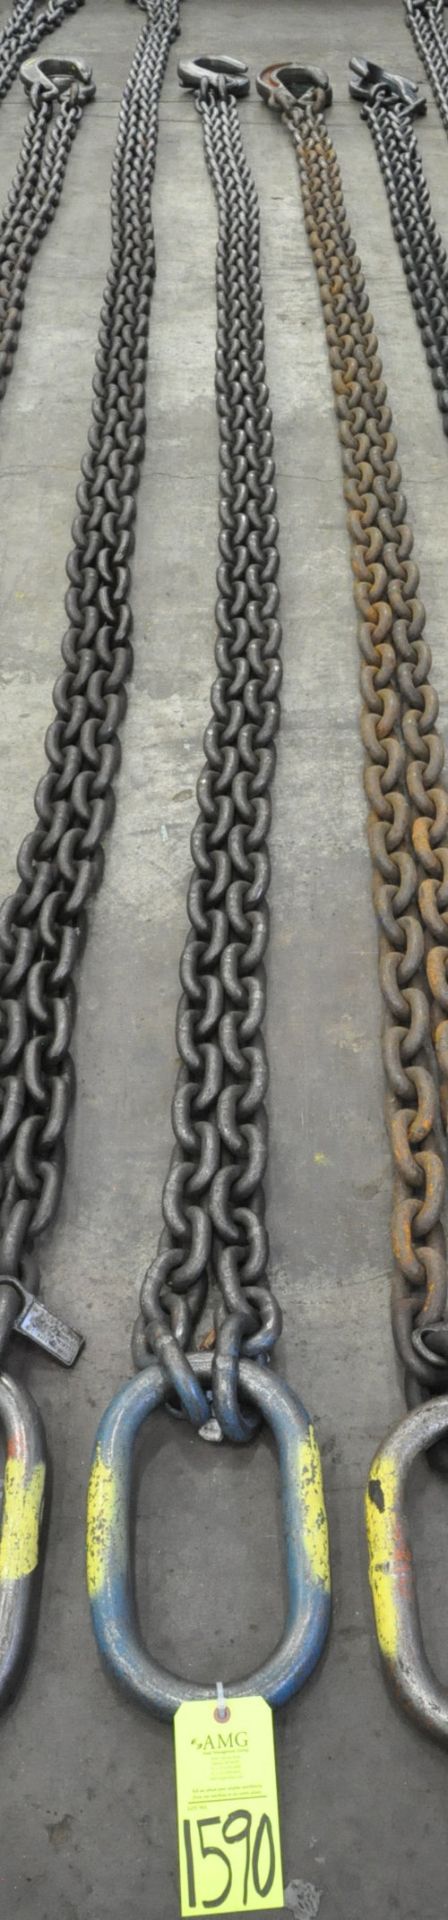 3/4" Link x 16' 6" Long 2-Hook Chain Sling, (Cert Tag, (G-21, (Yellow Tag)